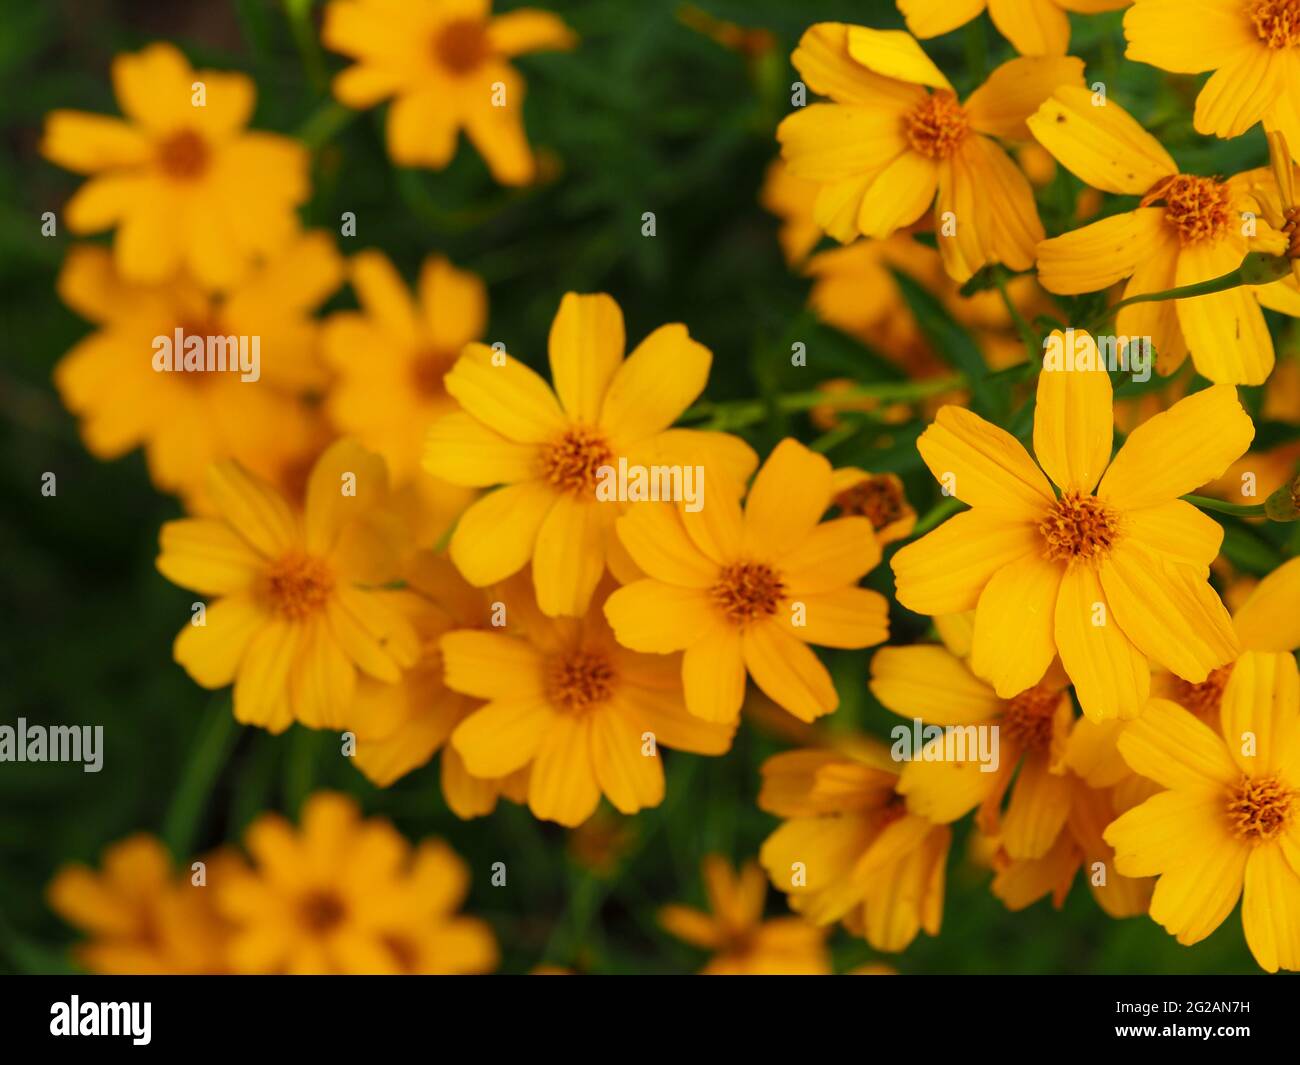 A mass of bright golden yellow daisy-like flowers of the Tree Marigold in glorious brilliant full bloom, Winter, Australia Stock Photo